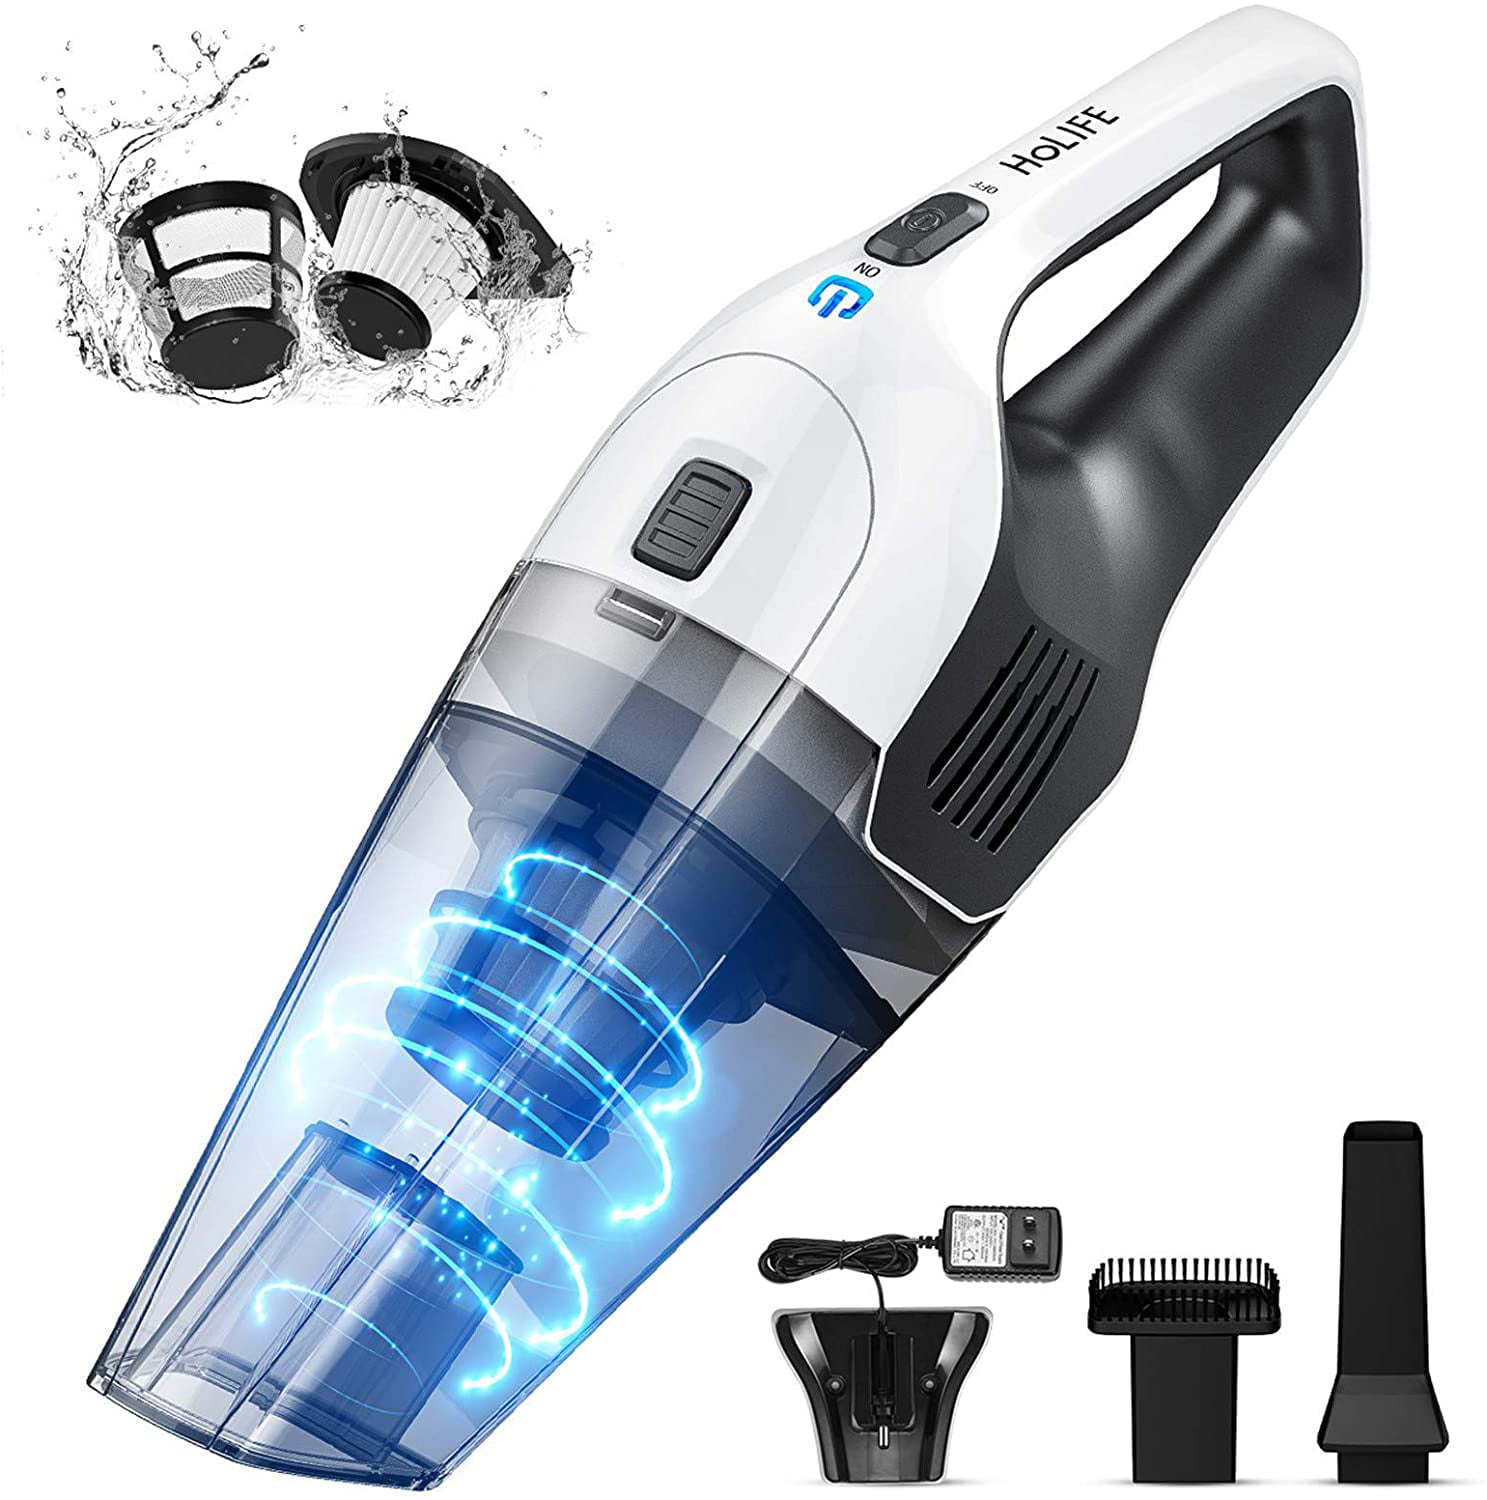 Cordless Handheld Vacuum Cleaner,Powered by Strong Motor,Lightweight Mini Vacuum Charge Car Vacuum Cleaner for Home and Car Cleaning 